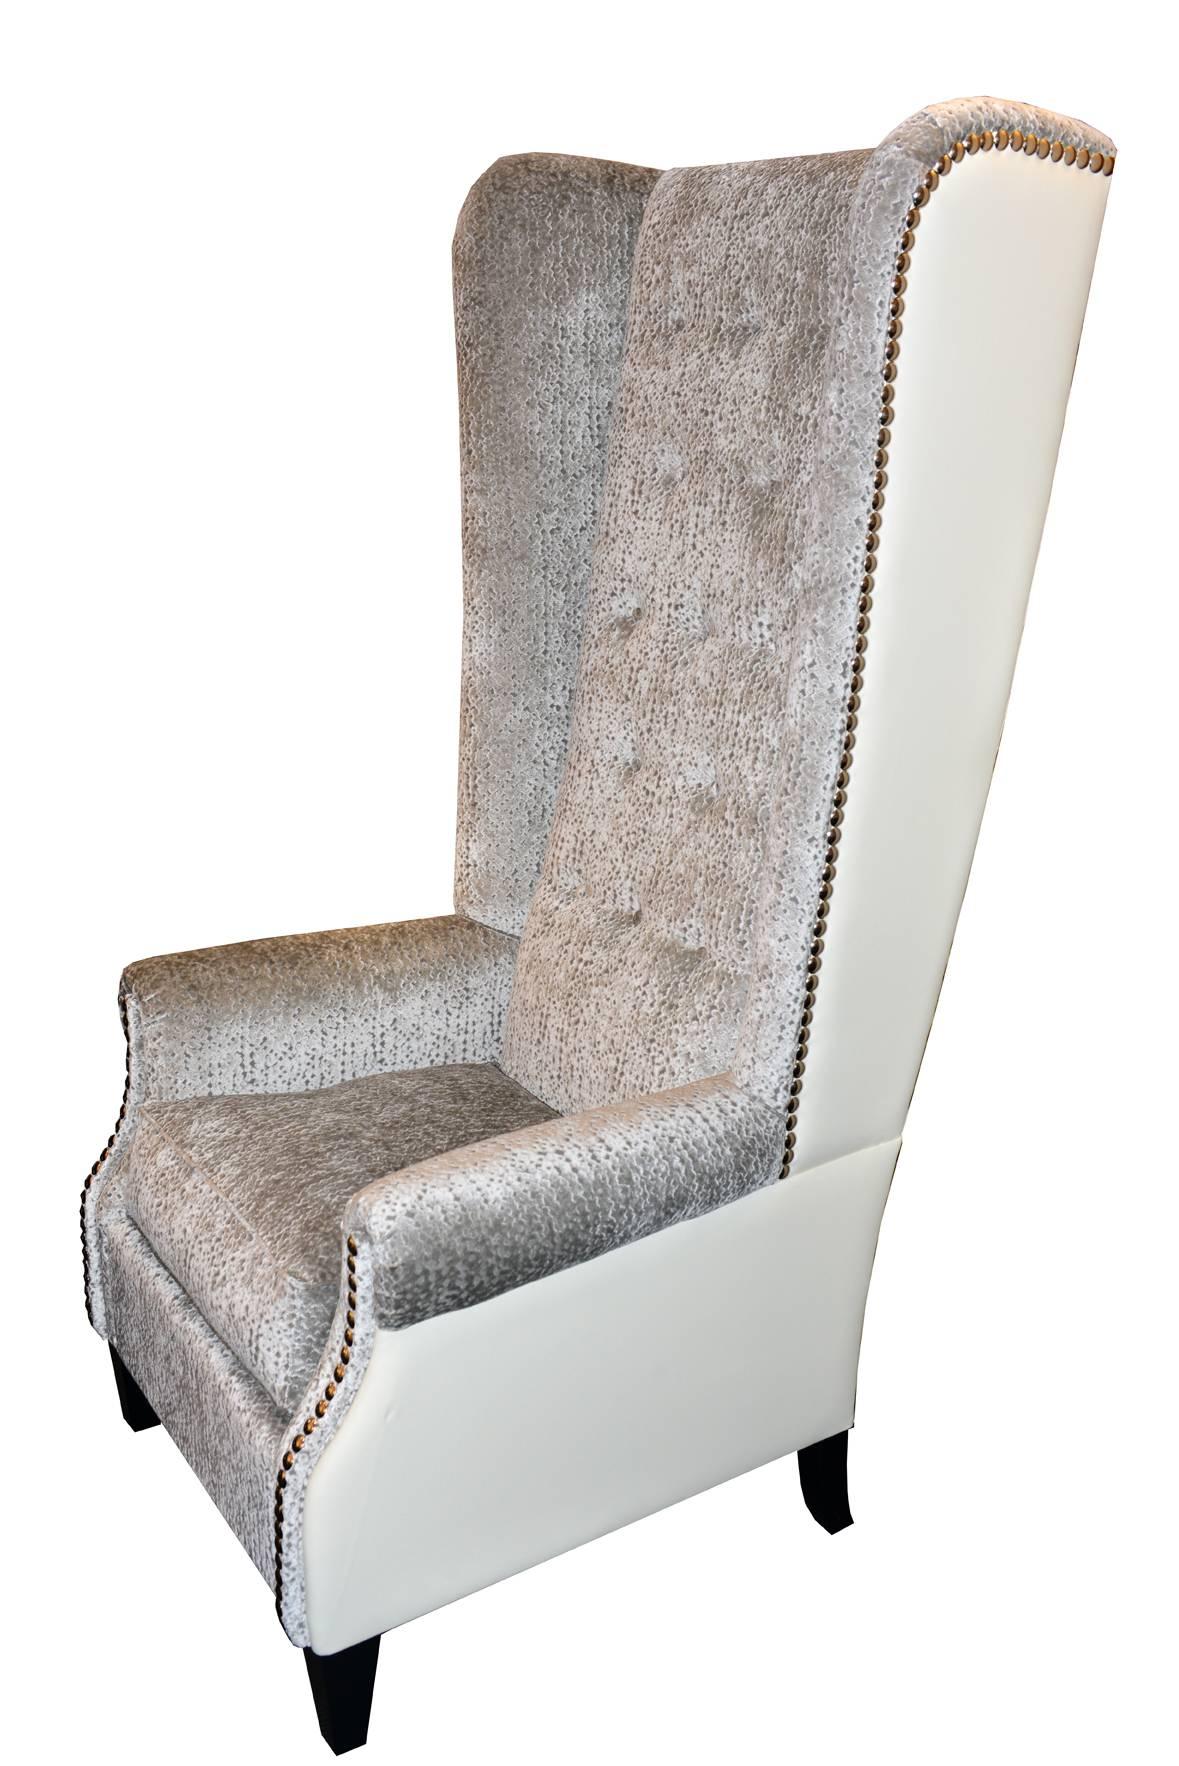 Greenwich armchair with Atlanta fabric and back in tango cream.
Genuine leather, silver chrome tacks and black lacquered feet. 
Set of two available, price: 19800,00€
.